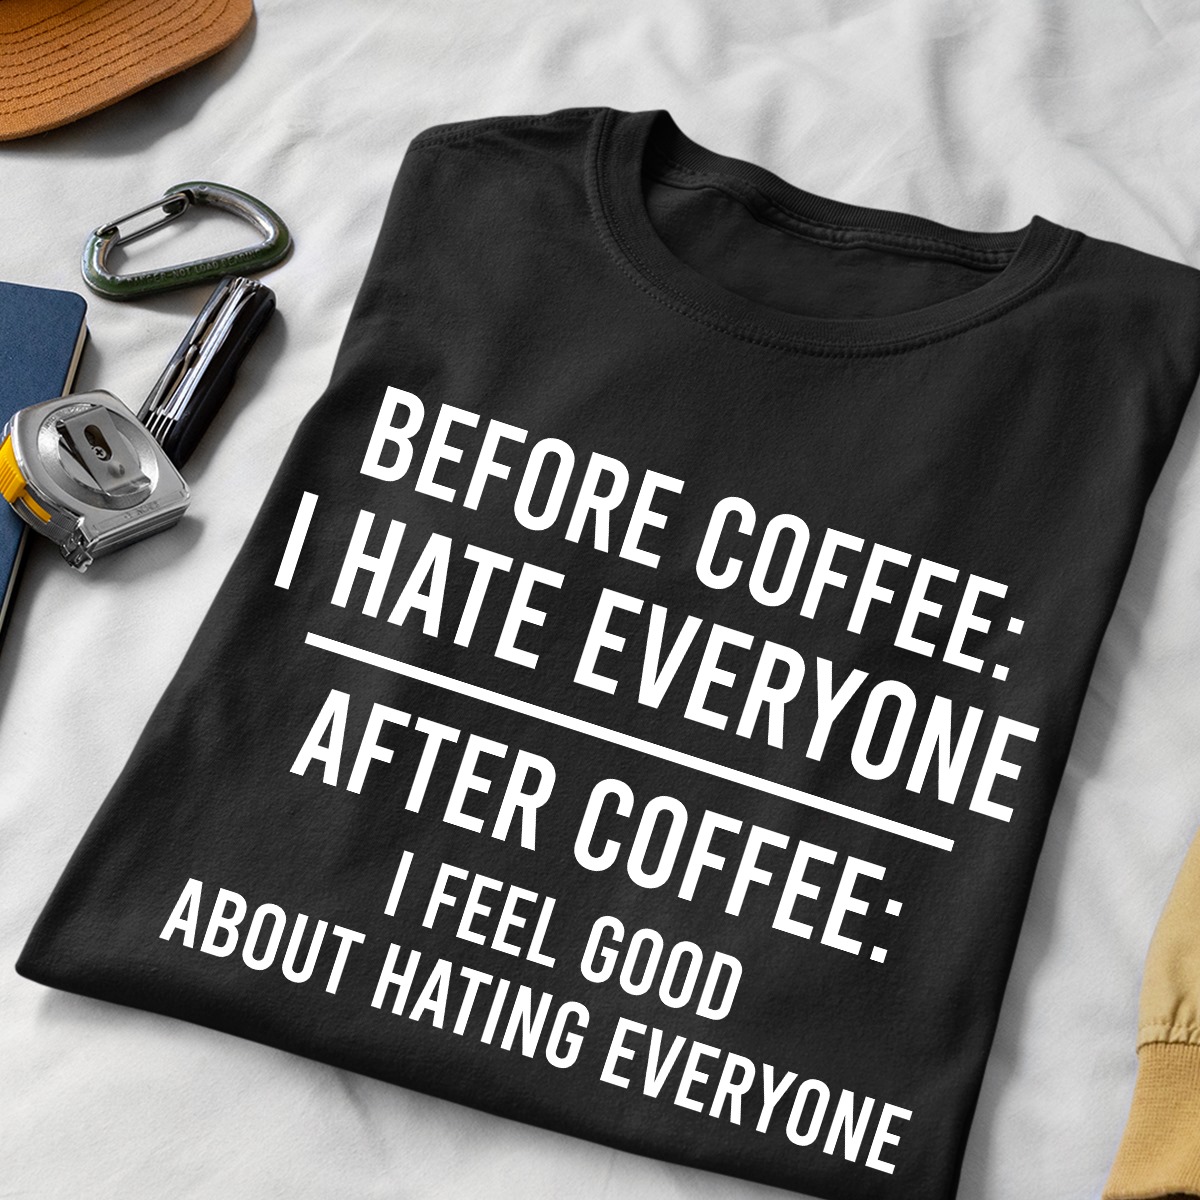 Before coffee I hate everyone after coffee I feel good about hating everyone - Coffee lover